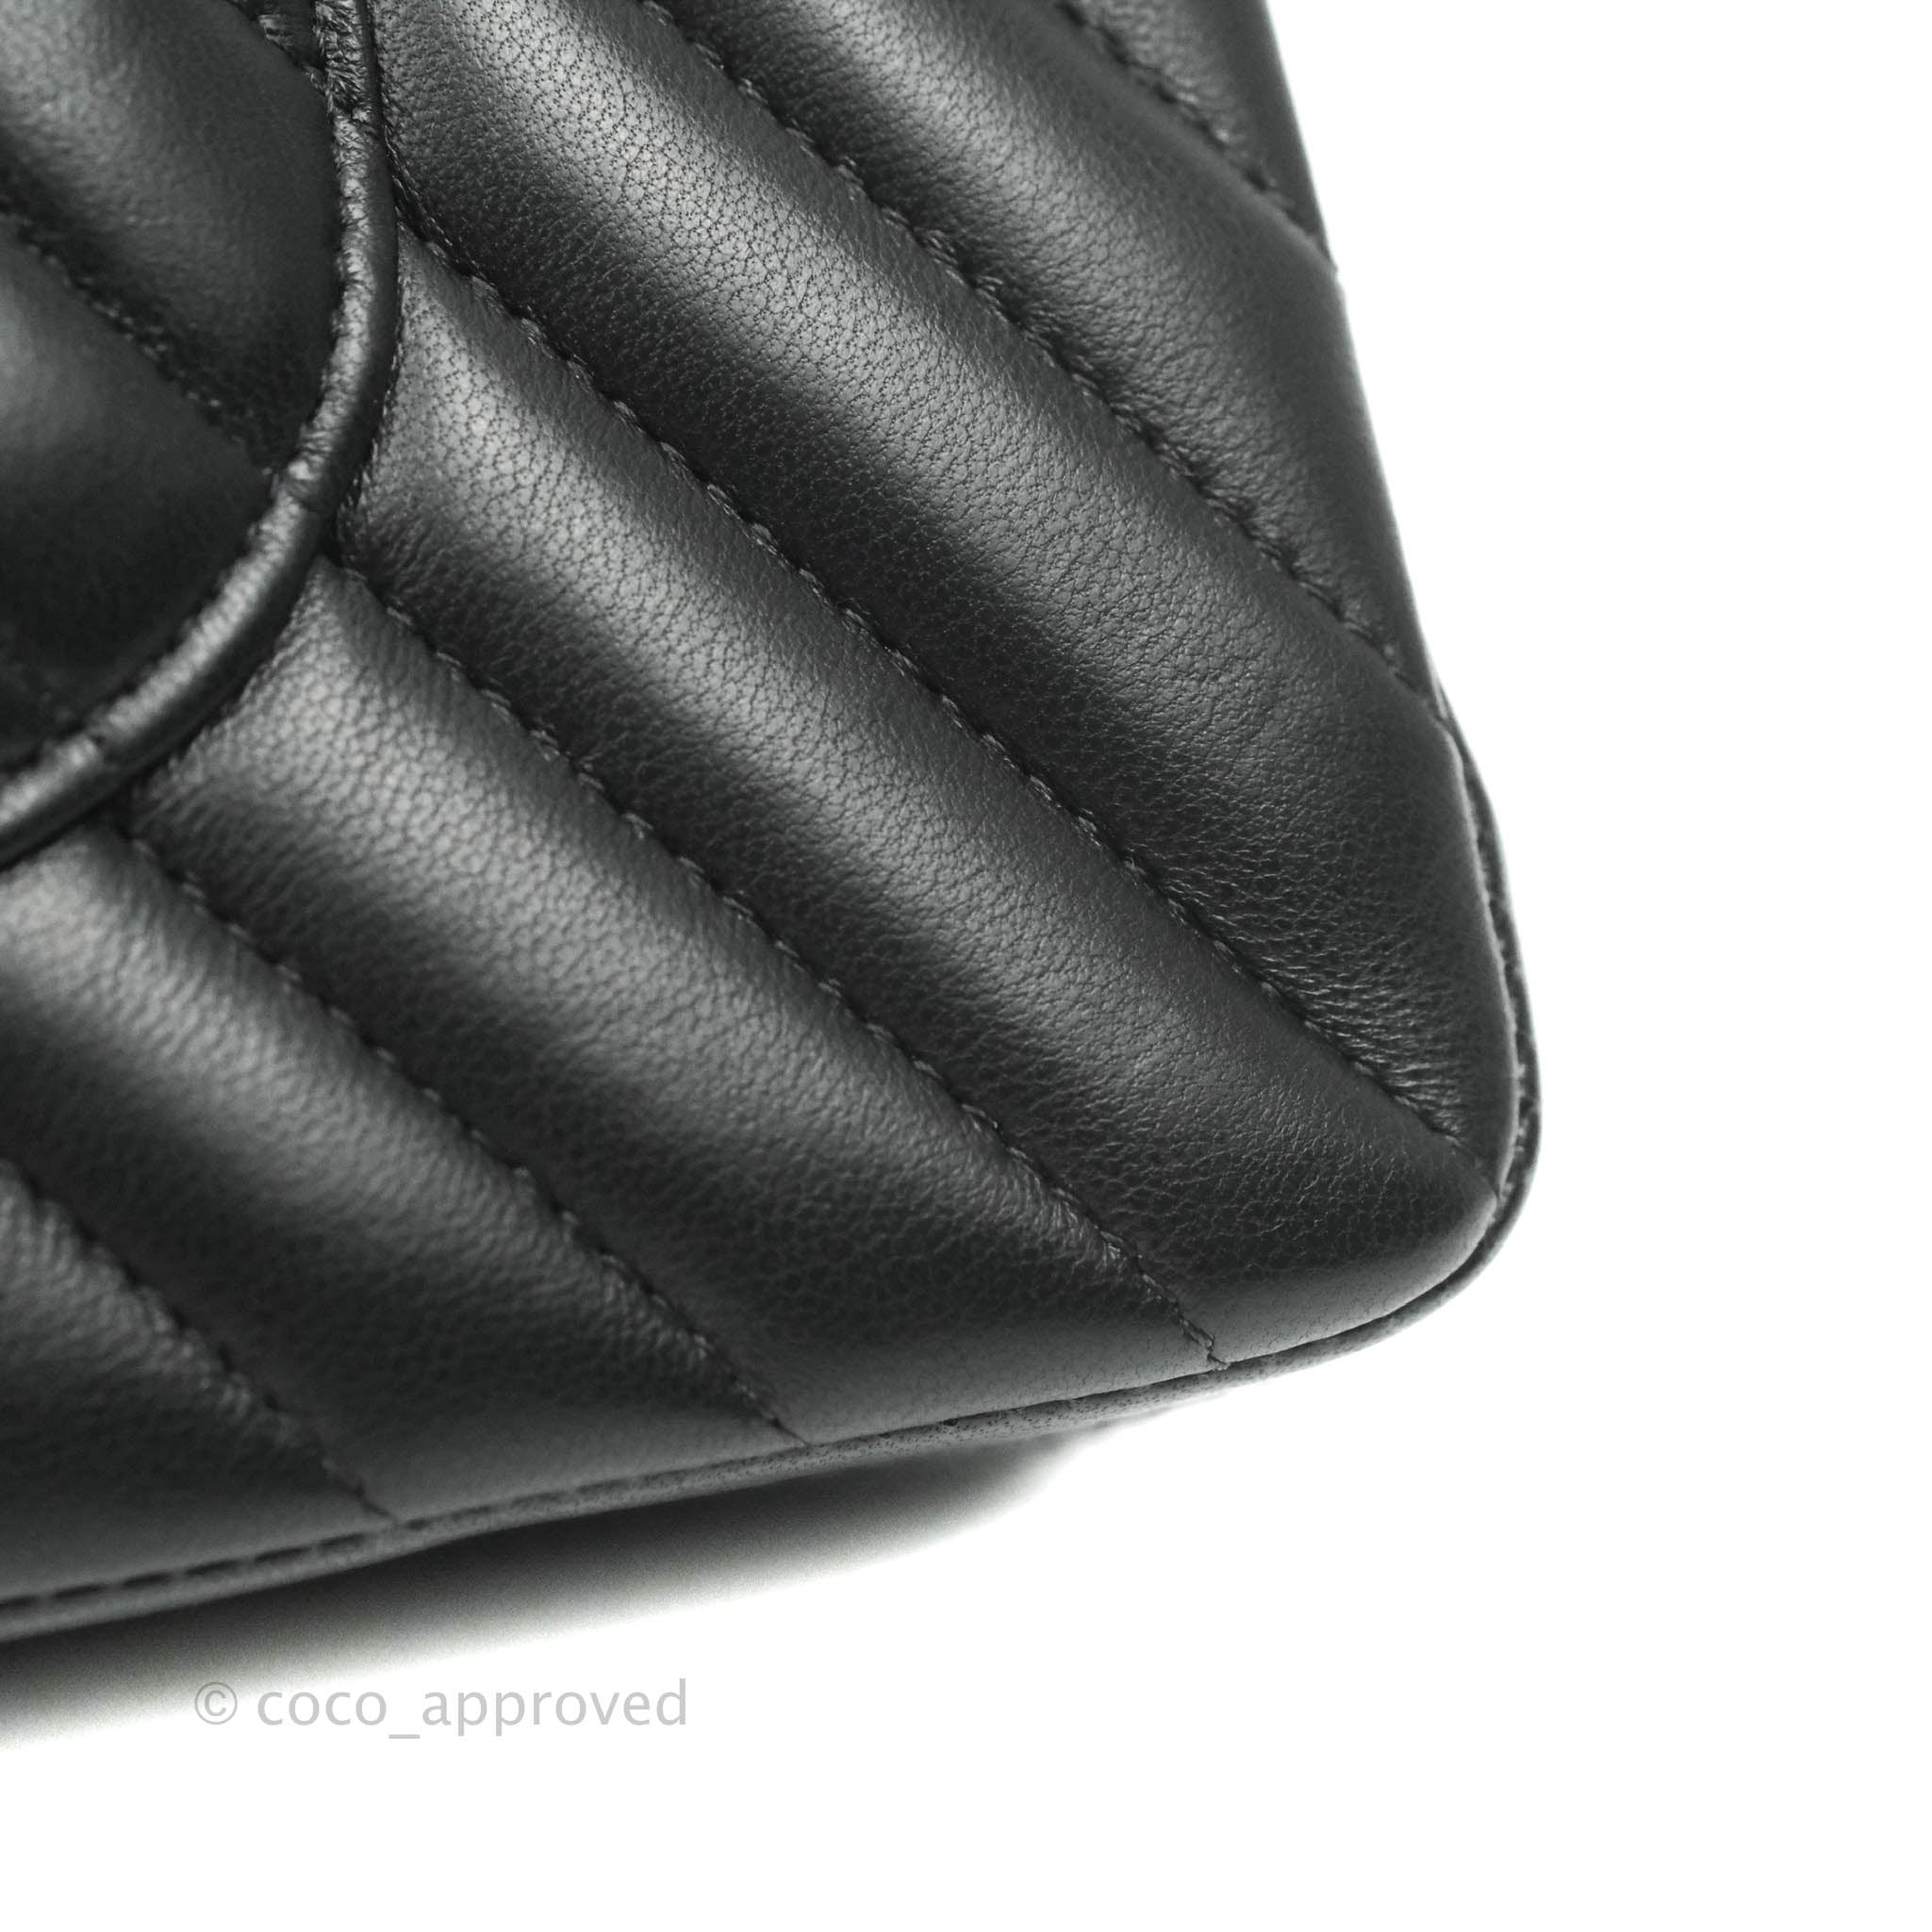 Chanel Chevron Flap Bag with Pyramid CC Clasp in Black Lambskin sale at USD  379. Free Shipping by courier to your addres…